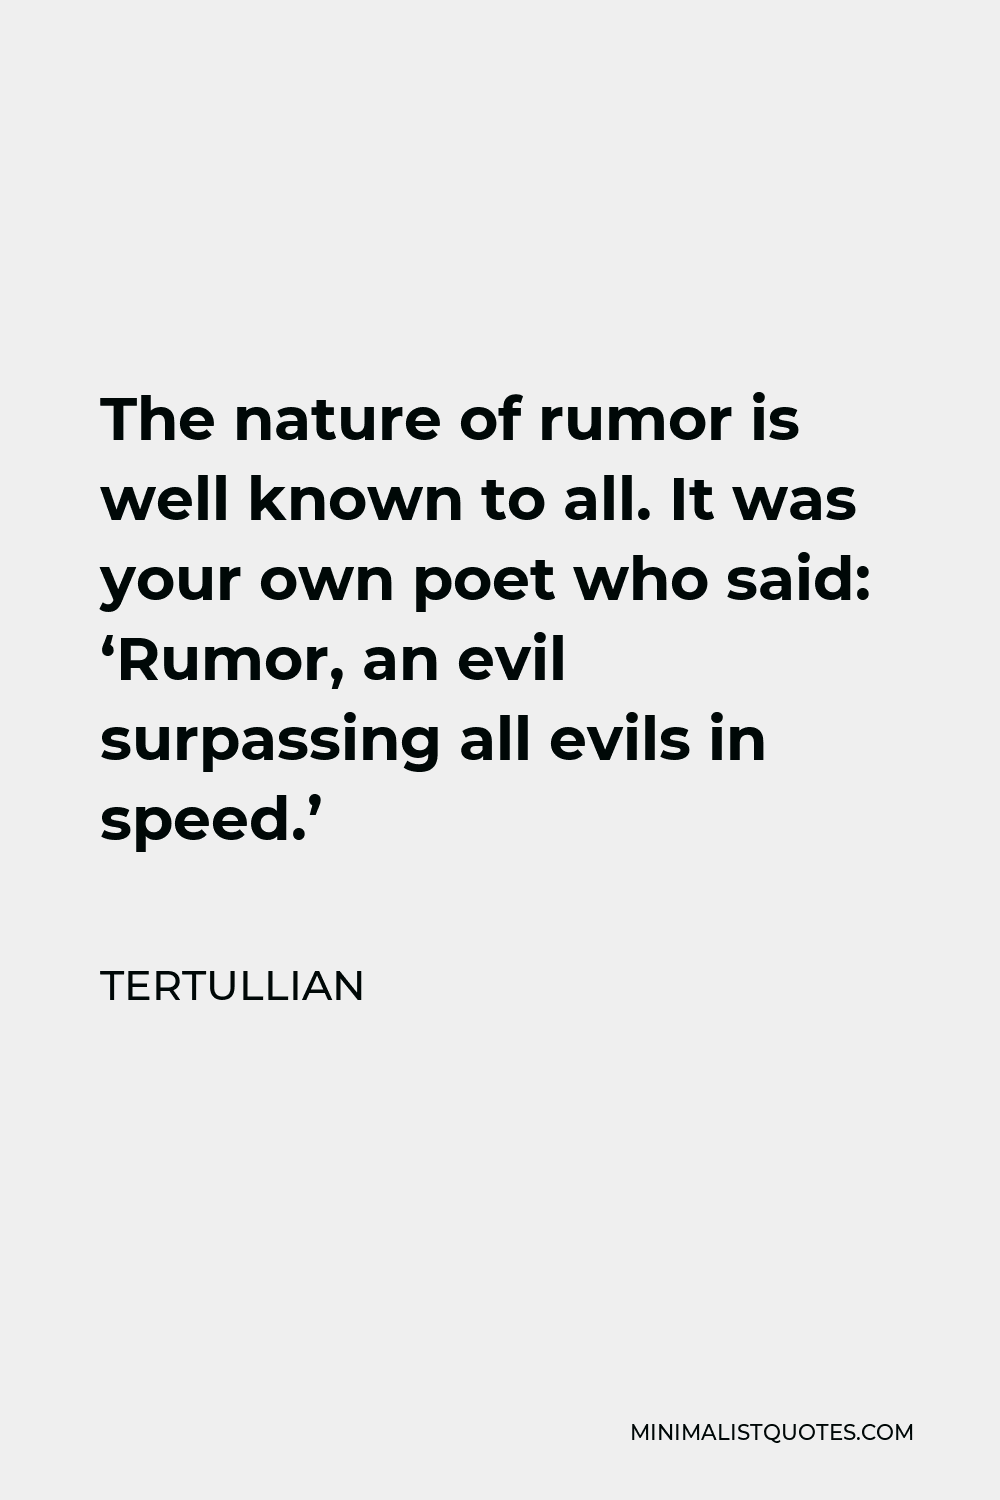 Tertullian Quote - The nature of rumor is well known to all. It was your own poet who said: ‘Rumor, an evil surpassing all evils in speed.’